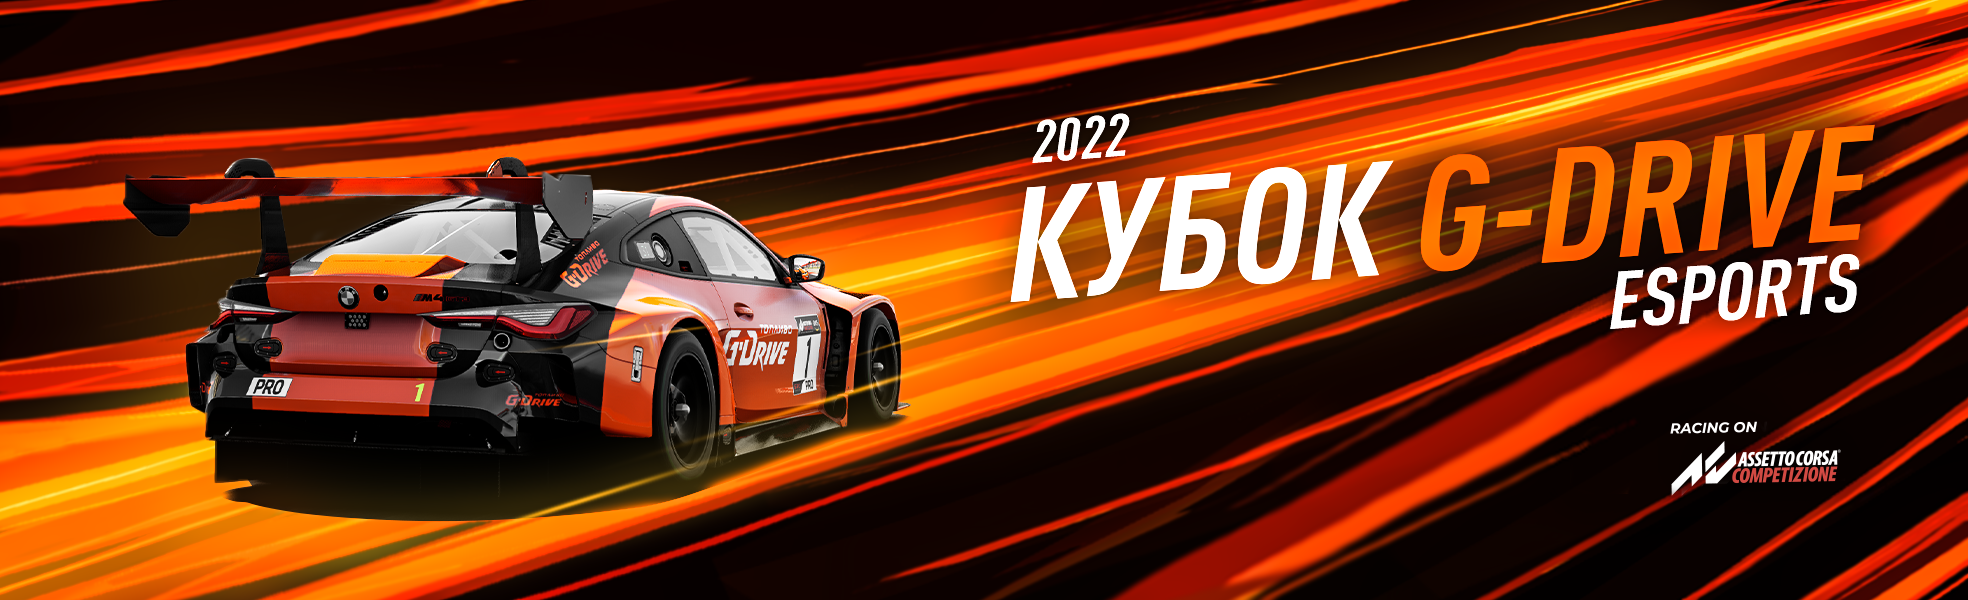 G-Drive GT3 Cup '22 